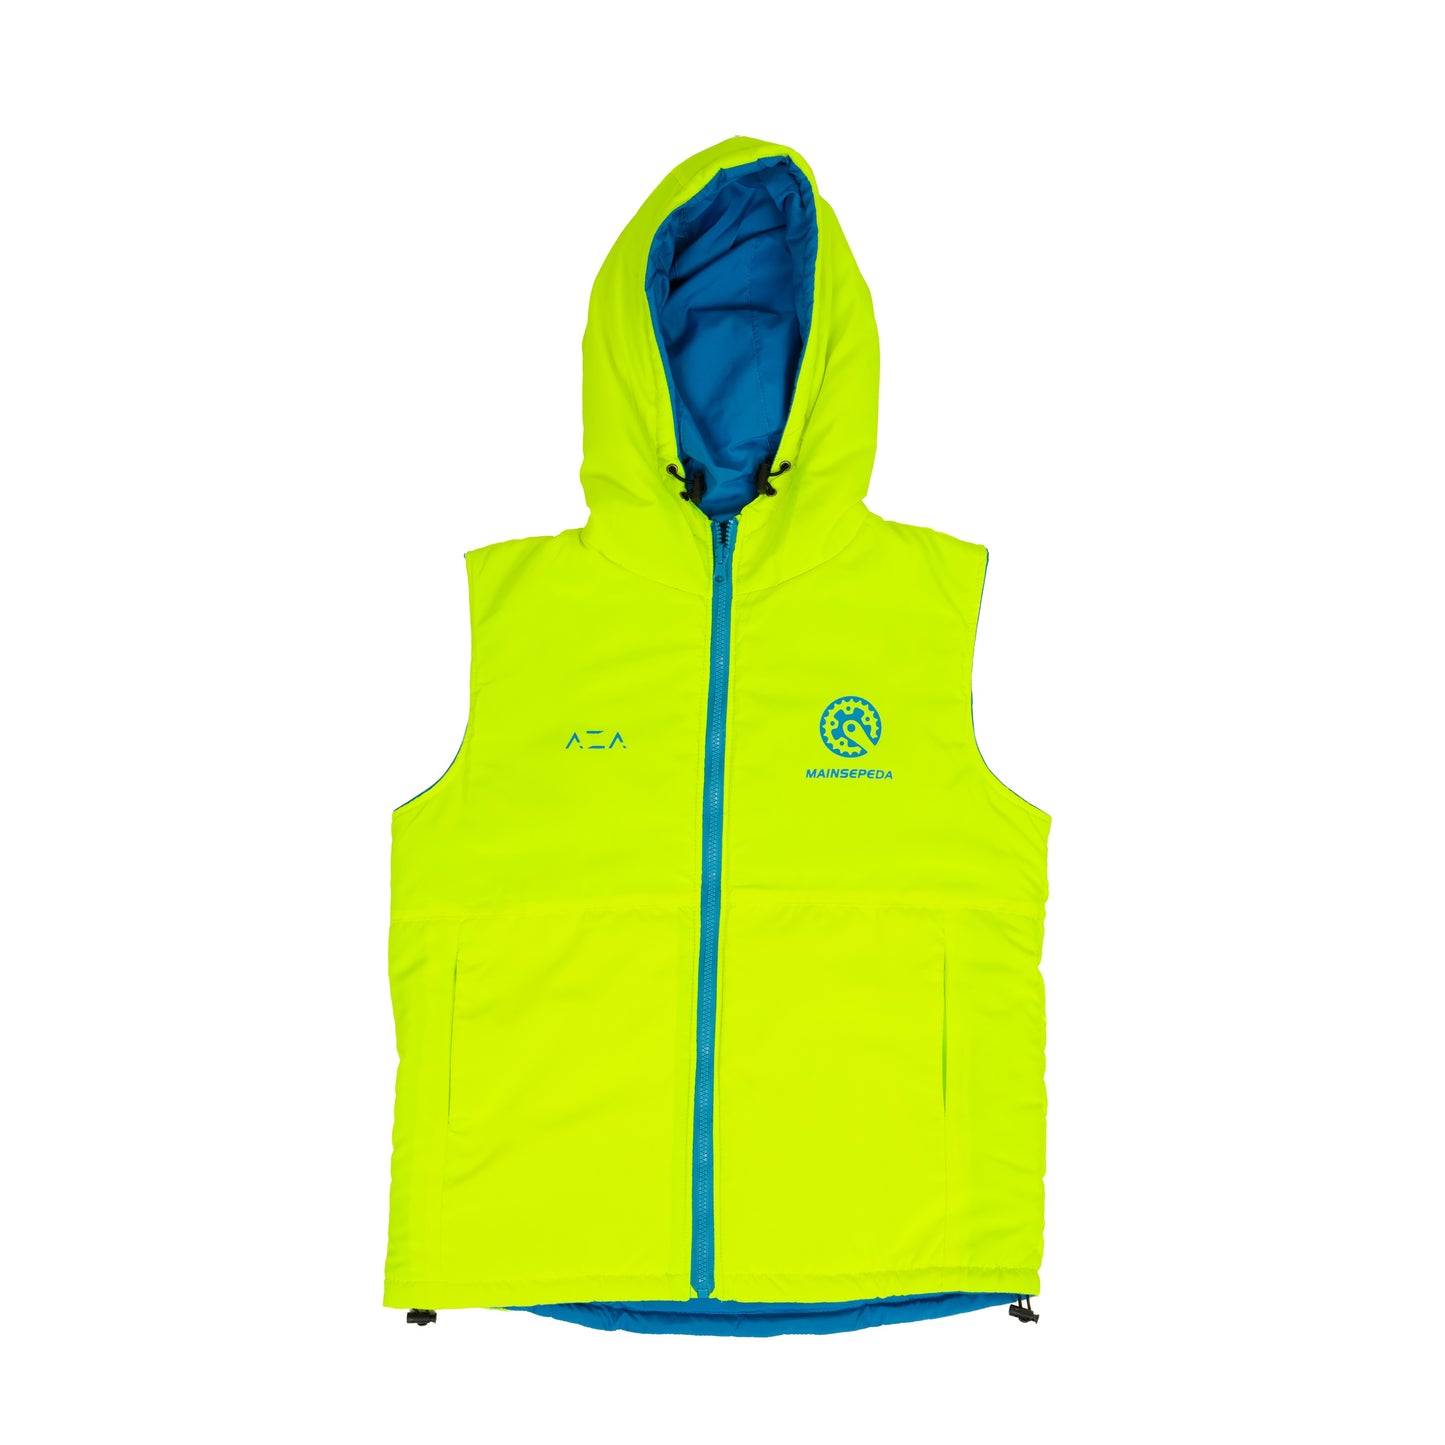 AZA x MAINSEPEDA Vest Reversible Safety First Edition